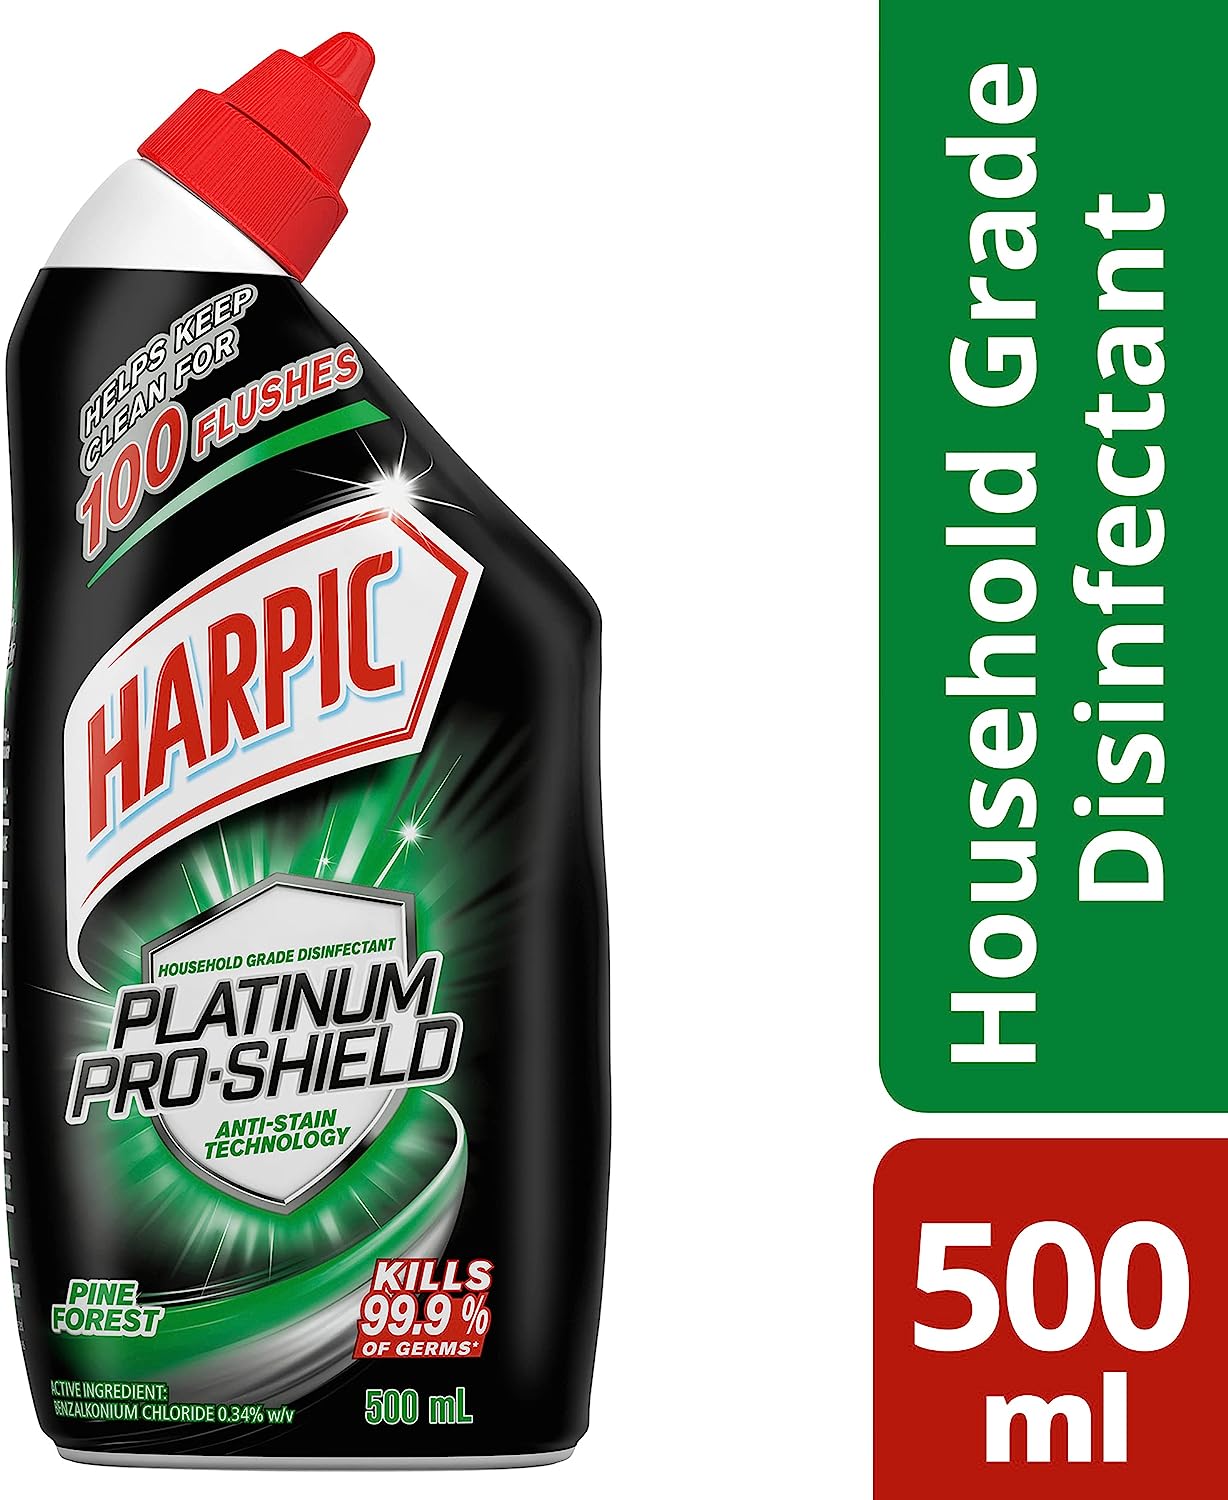 Harpic Platinum Anti-Stain Technology Toilet Cleaner, Pine Forest 500mL (Pack of 8)